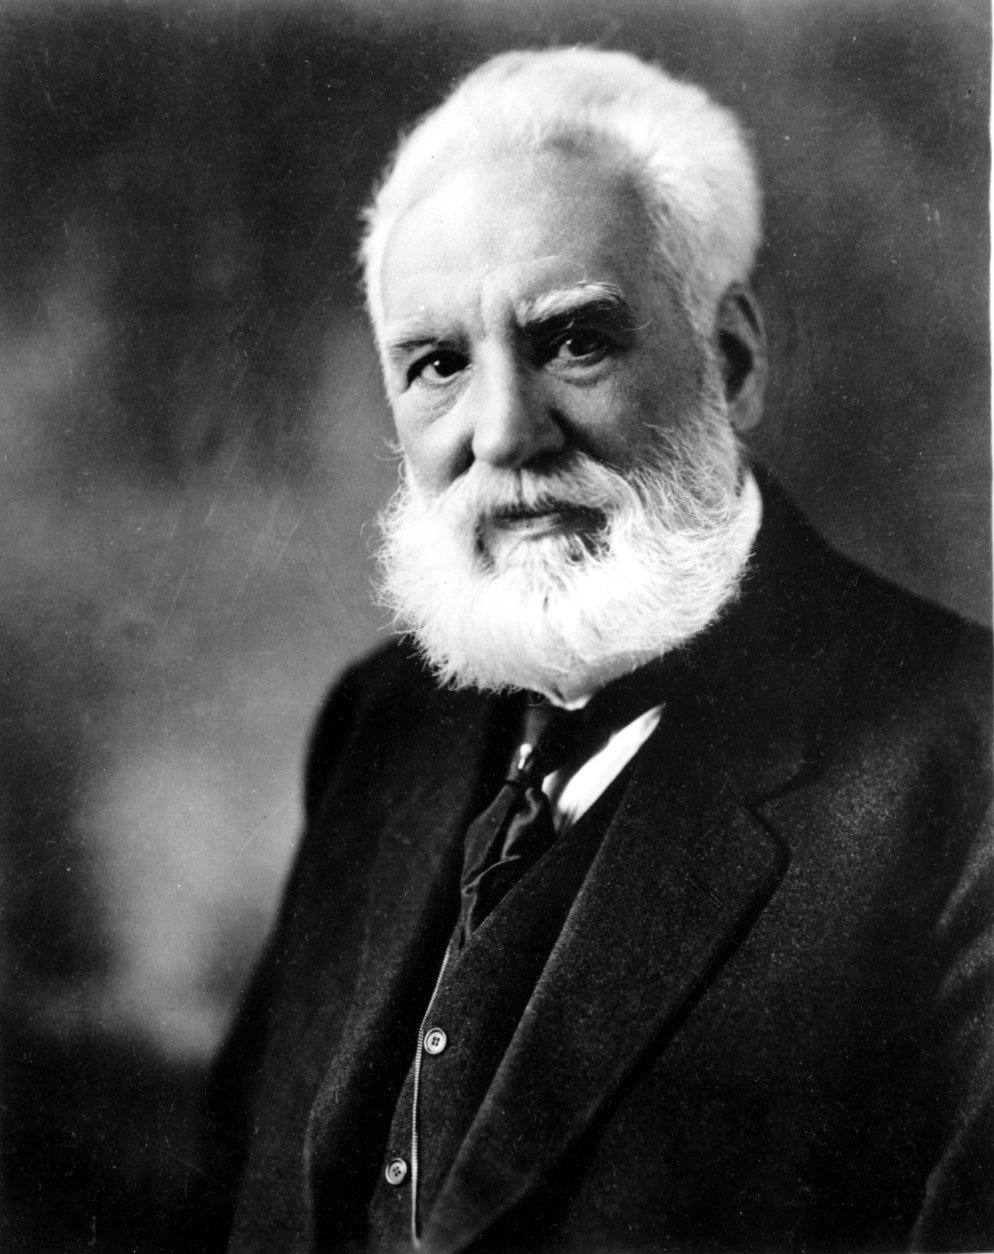 In 1922, Alexander Graham Bell, generally regarded as the inventor of the telephone, died in Nova Scotia, Canada, at age 75.

This is an undated photograph of Alexander Graham Bell, inventor of the telephone. (AP Photo)